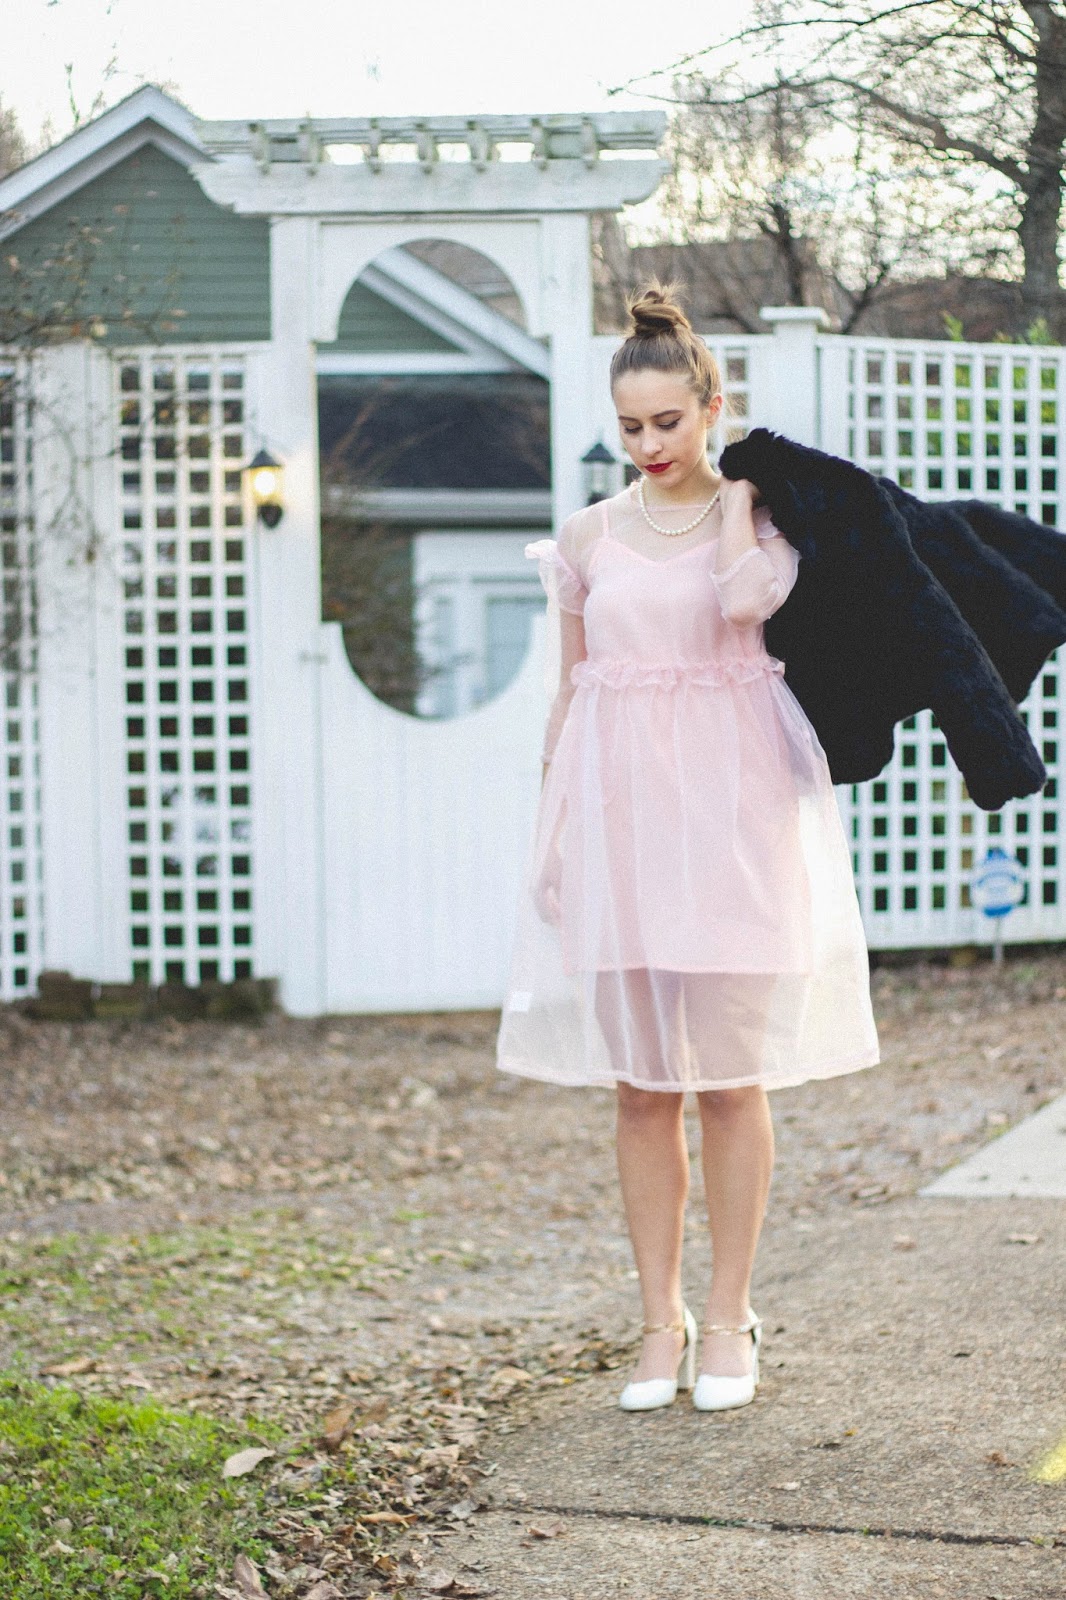 vintage, vintage style, vintage outfit, the white pepper dress, pink chiffon dress, fur coat, pearls, hollywood regency, 60's style, whimsical, dreamy outfit, outfit, classic style, old hollywood outfit, glamorous, holiday party outfit, girly things , dreamer,